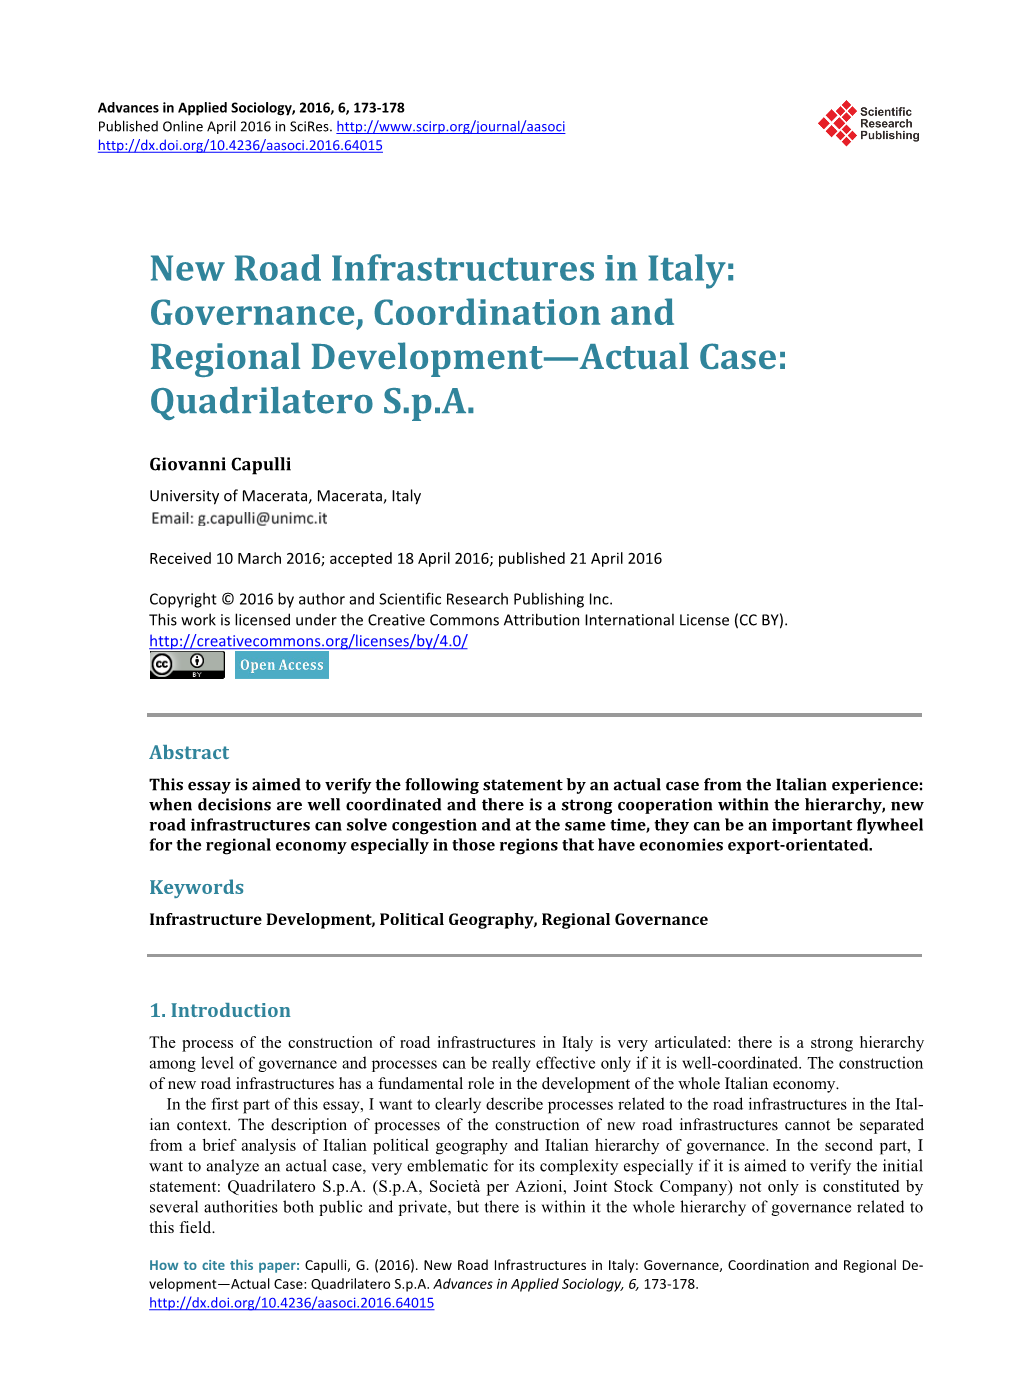 New Road Infrastructures in Italy: Governance, Coordination and Regional Development—Actual Case: Quadrilatero S.P.A